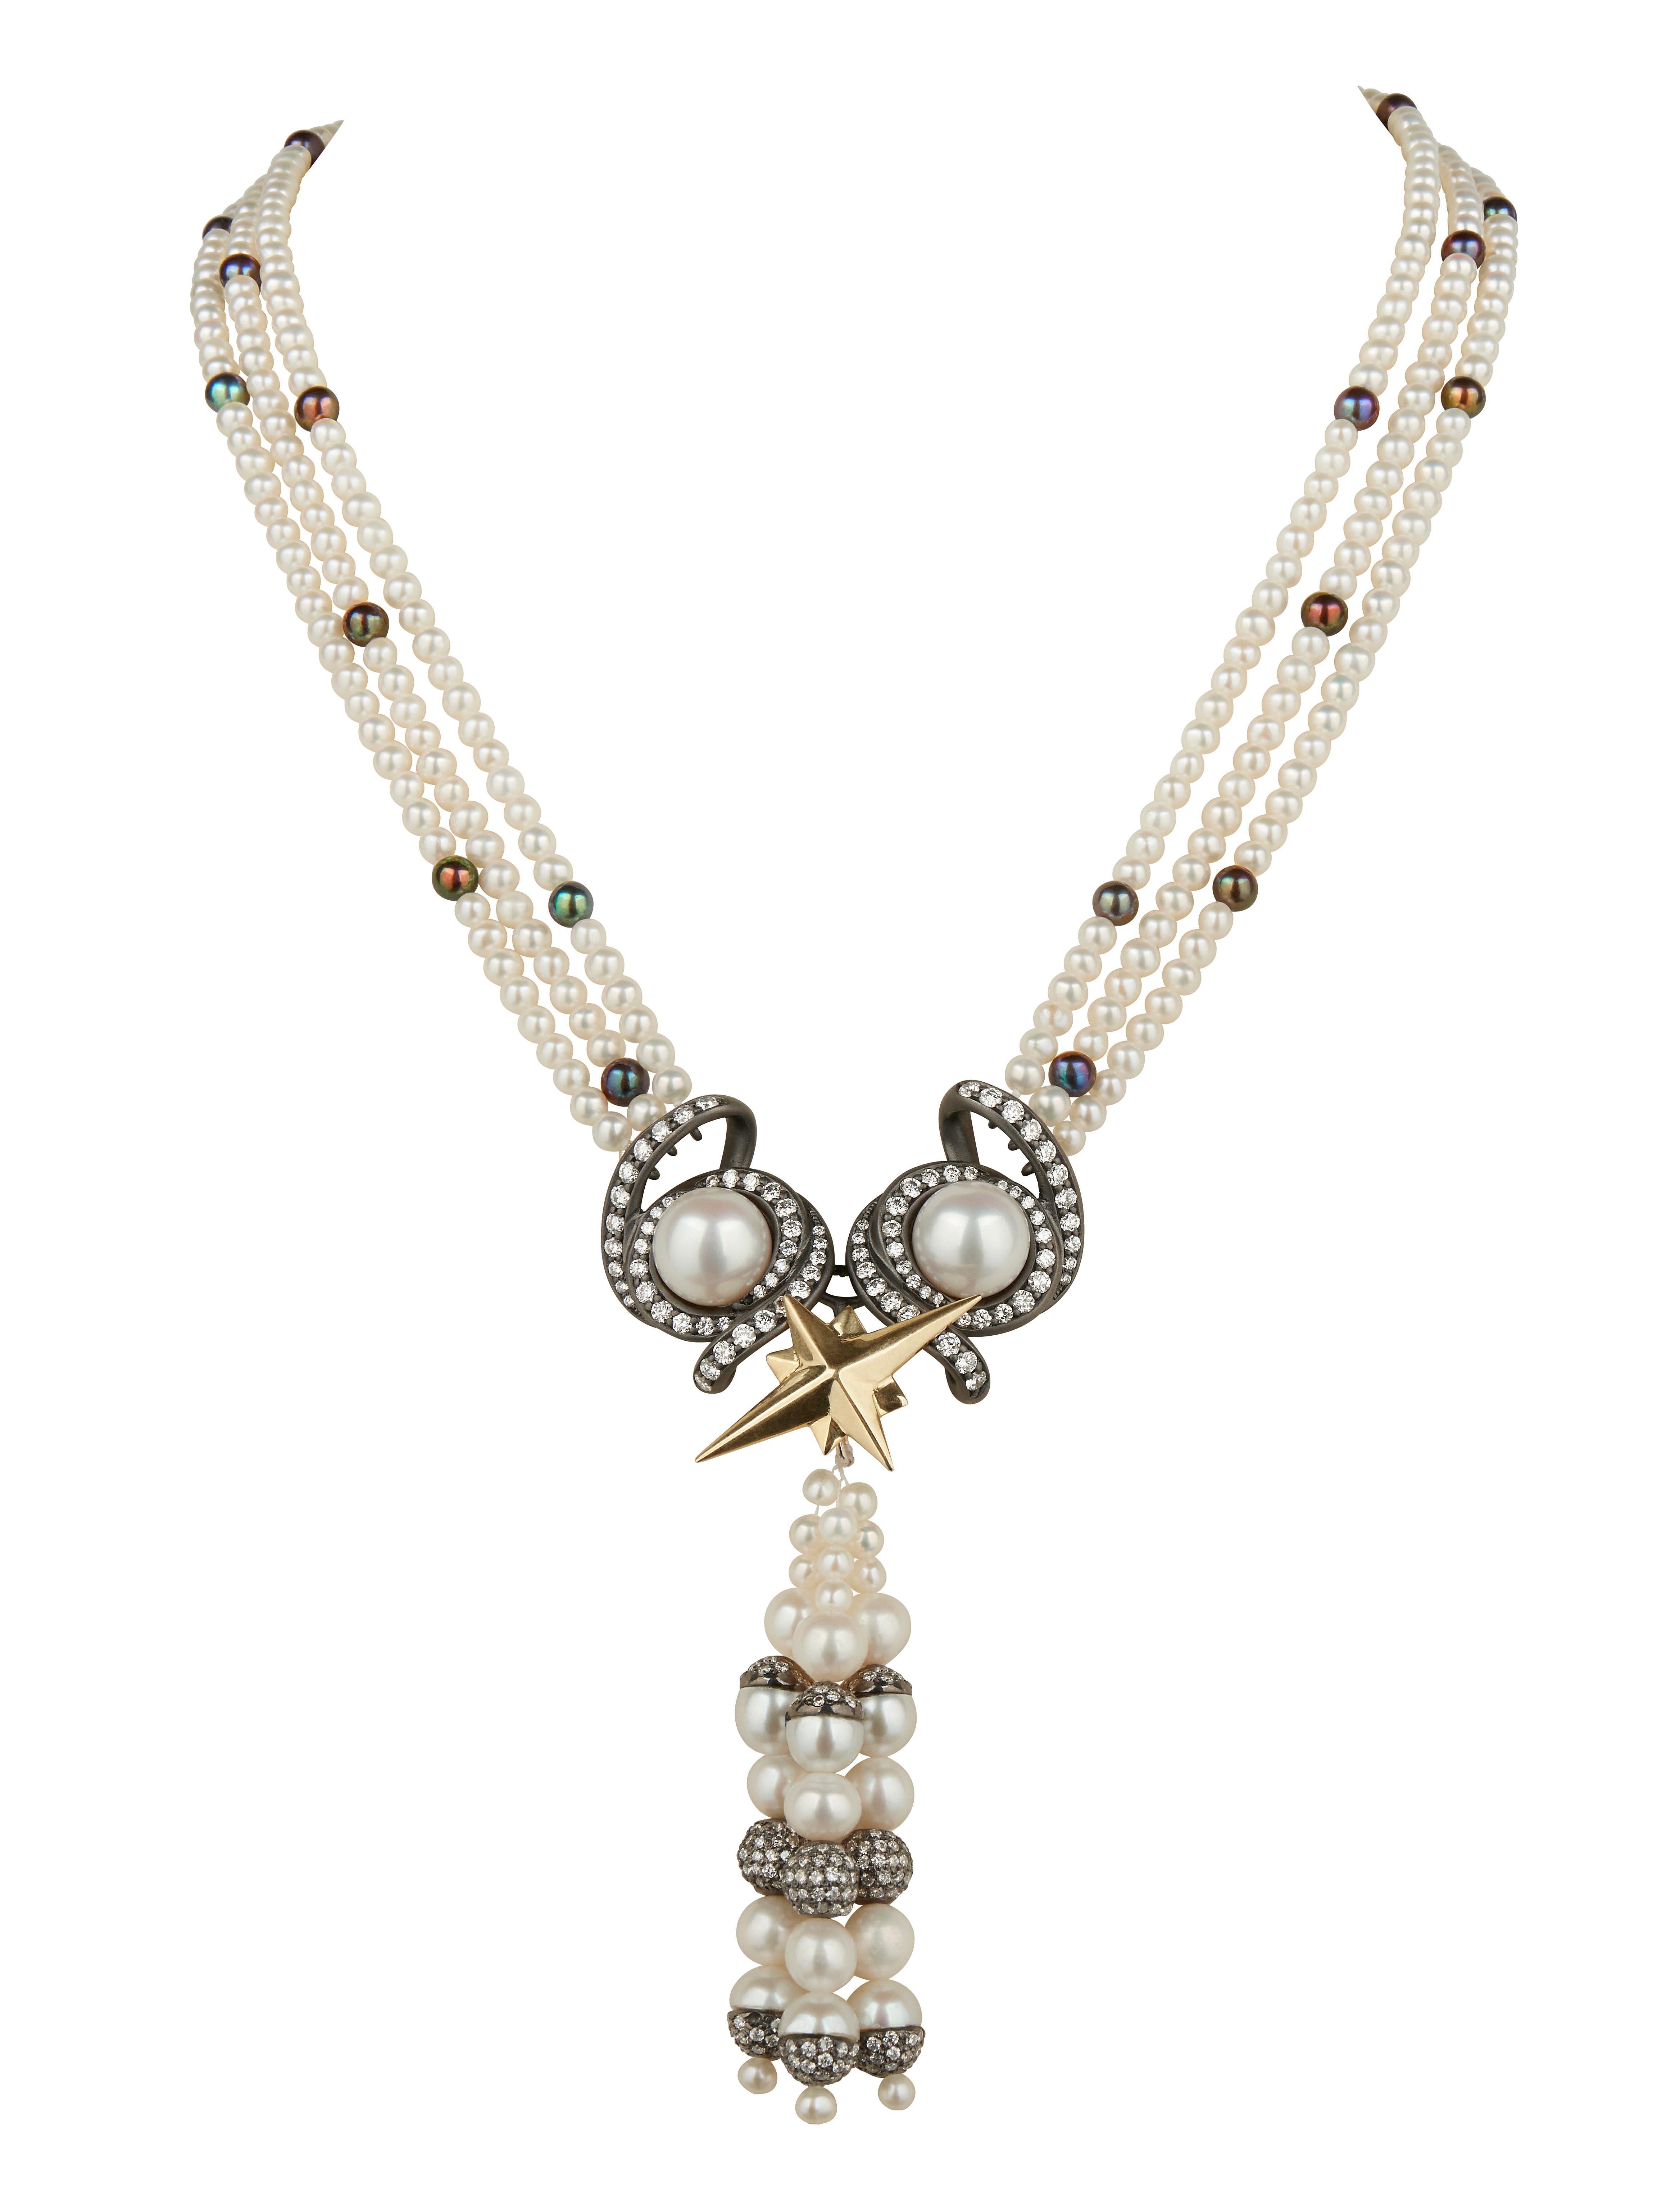 18 Carat Gold, Blackened Silver, Pearl and Diamond 'Voyager' Tassel Necklace For Sale 5